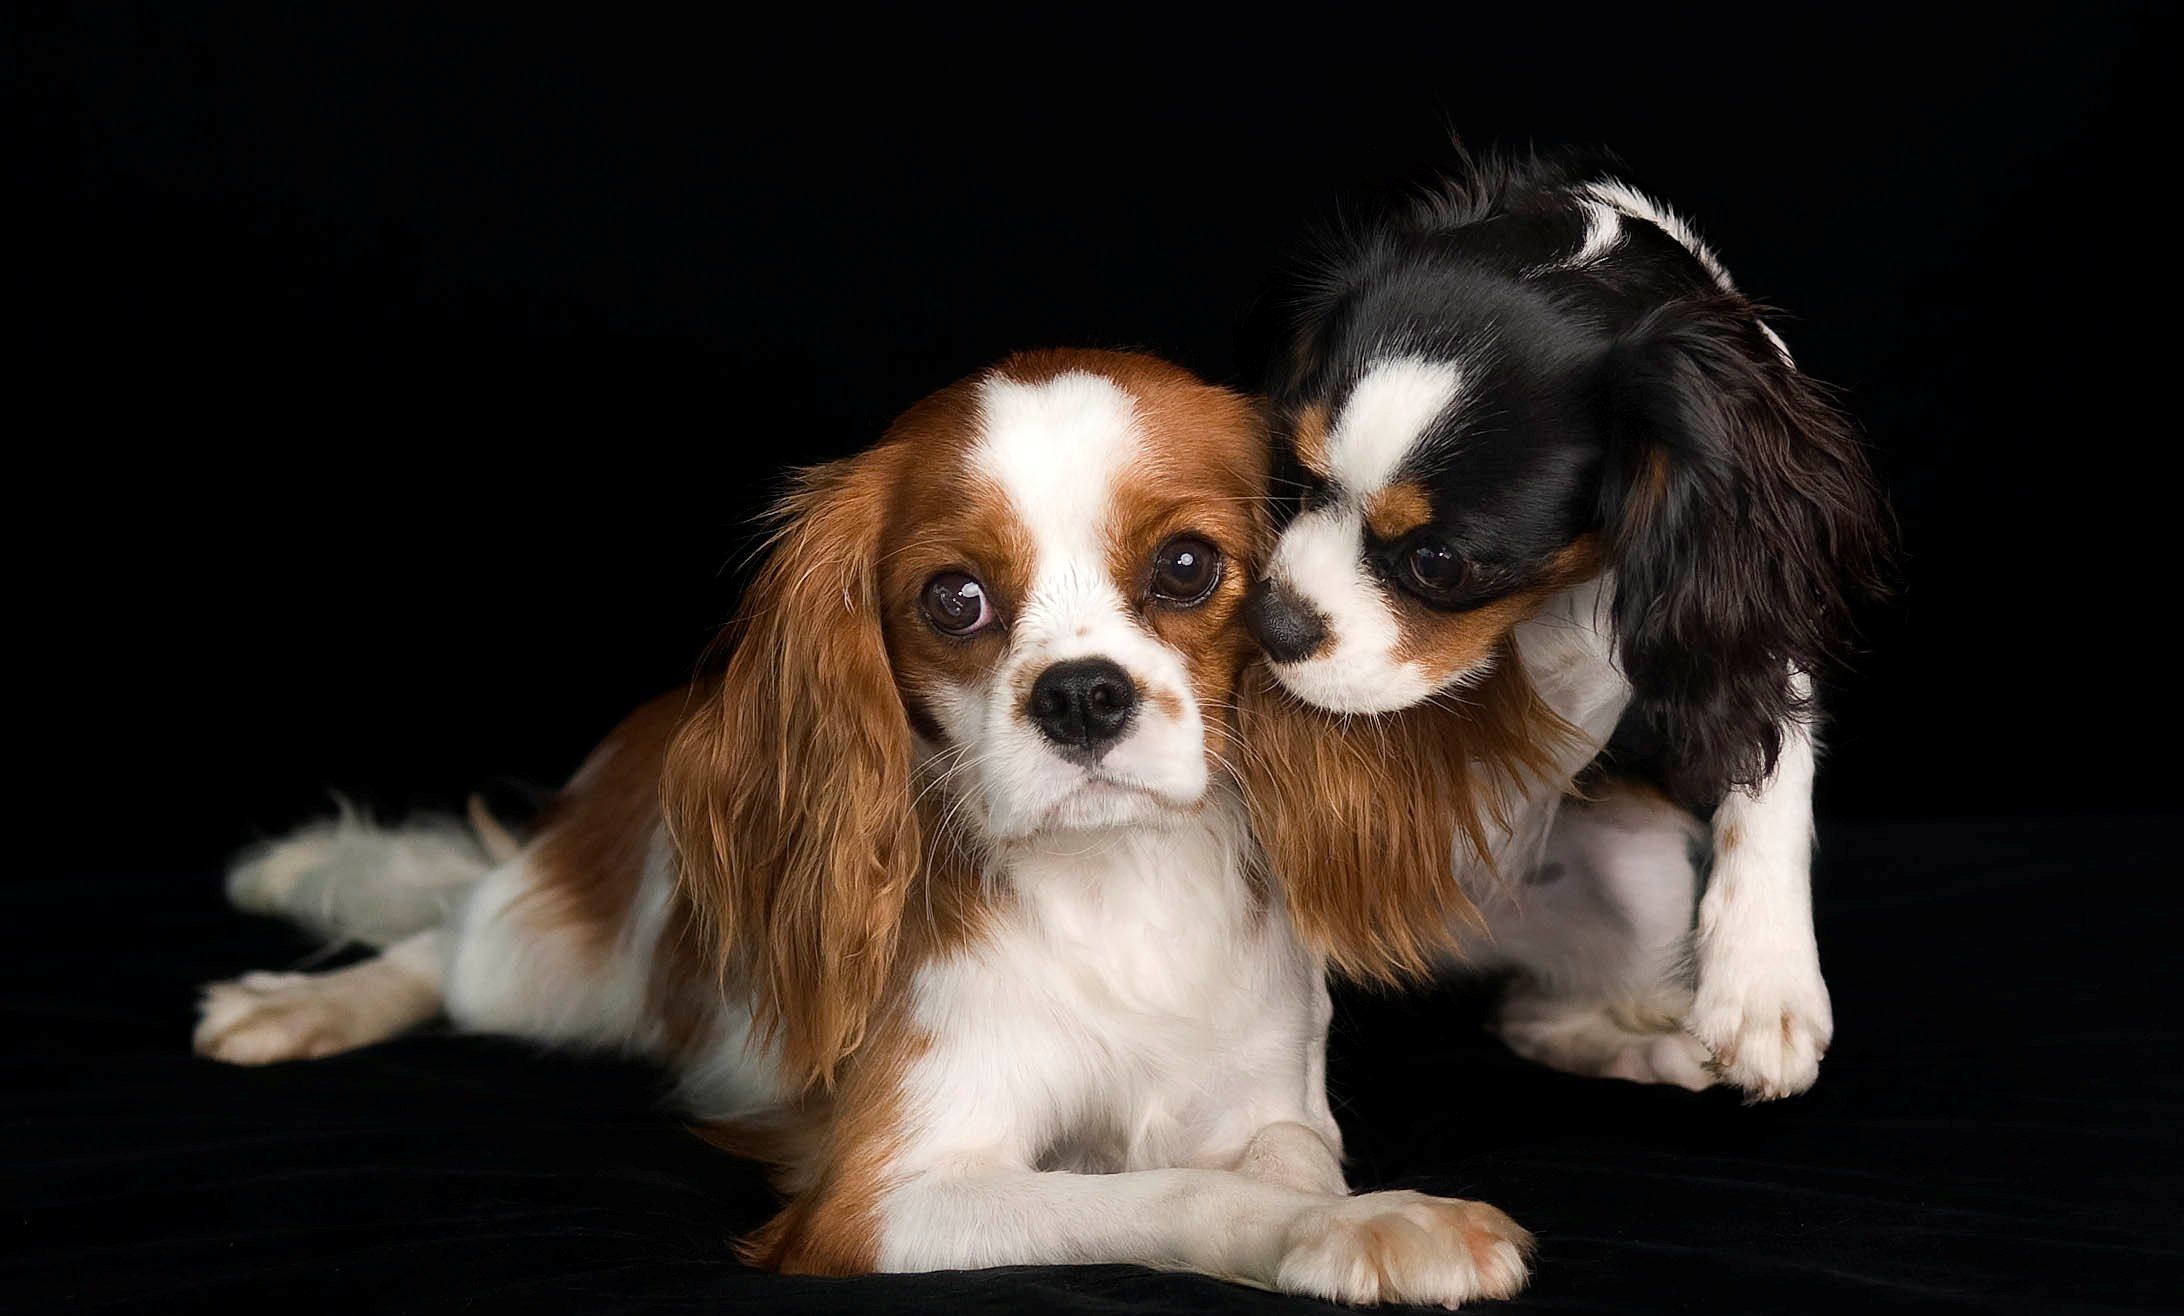 Lovely Cavalier King Charles Spaniel dogs photo and wallpaper